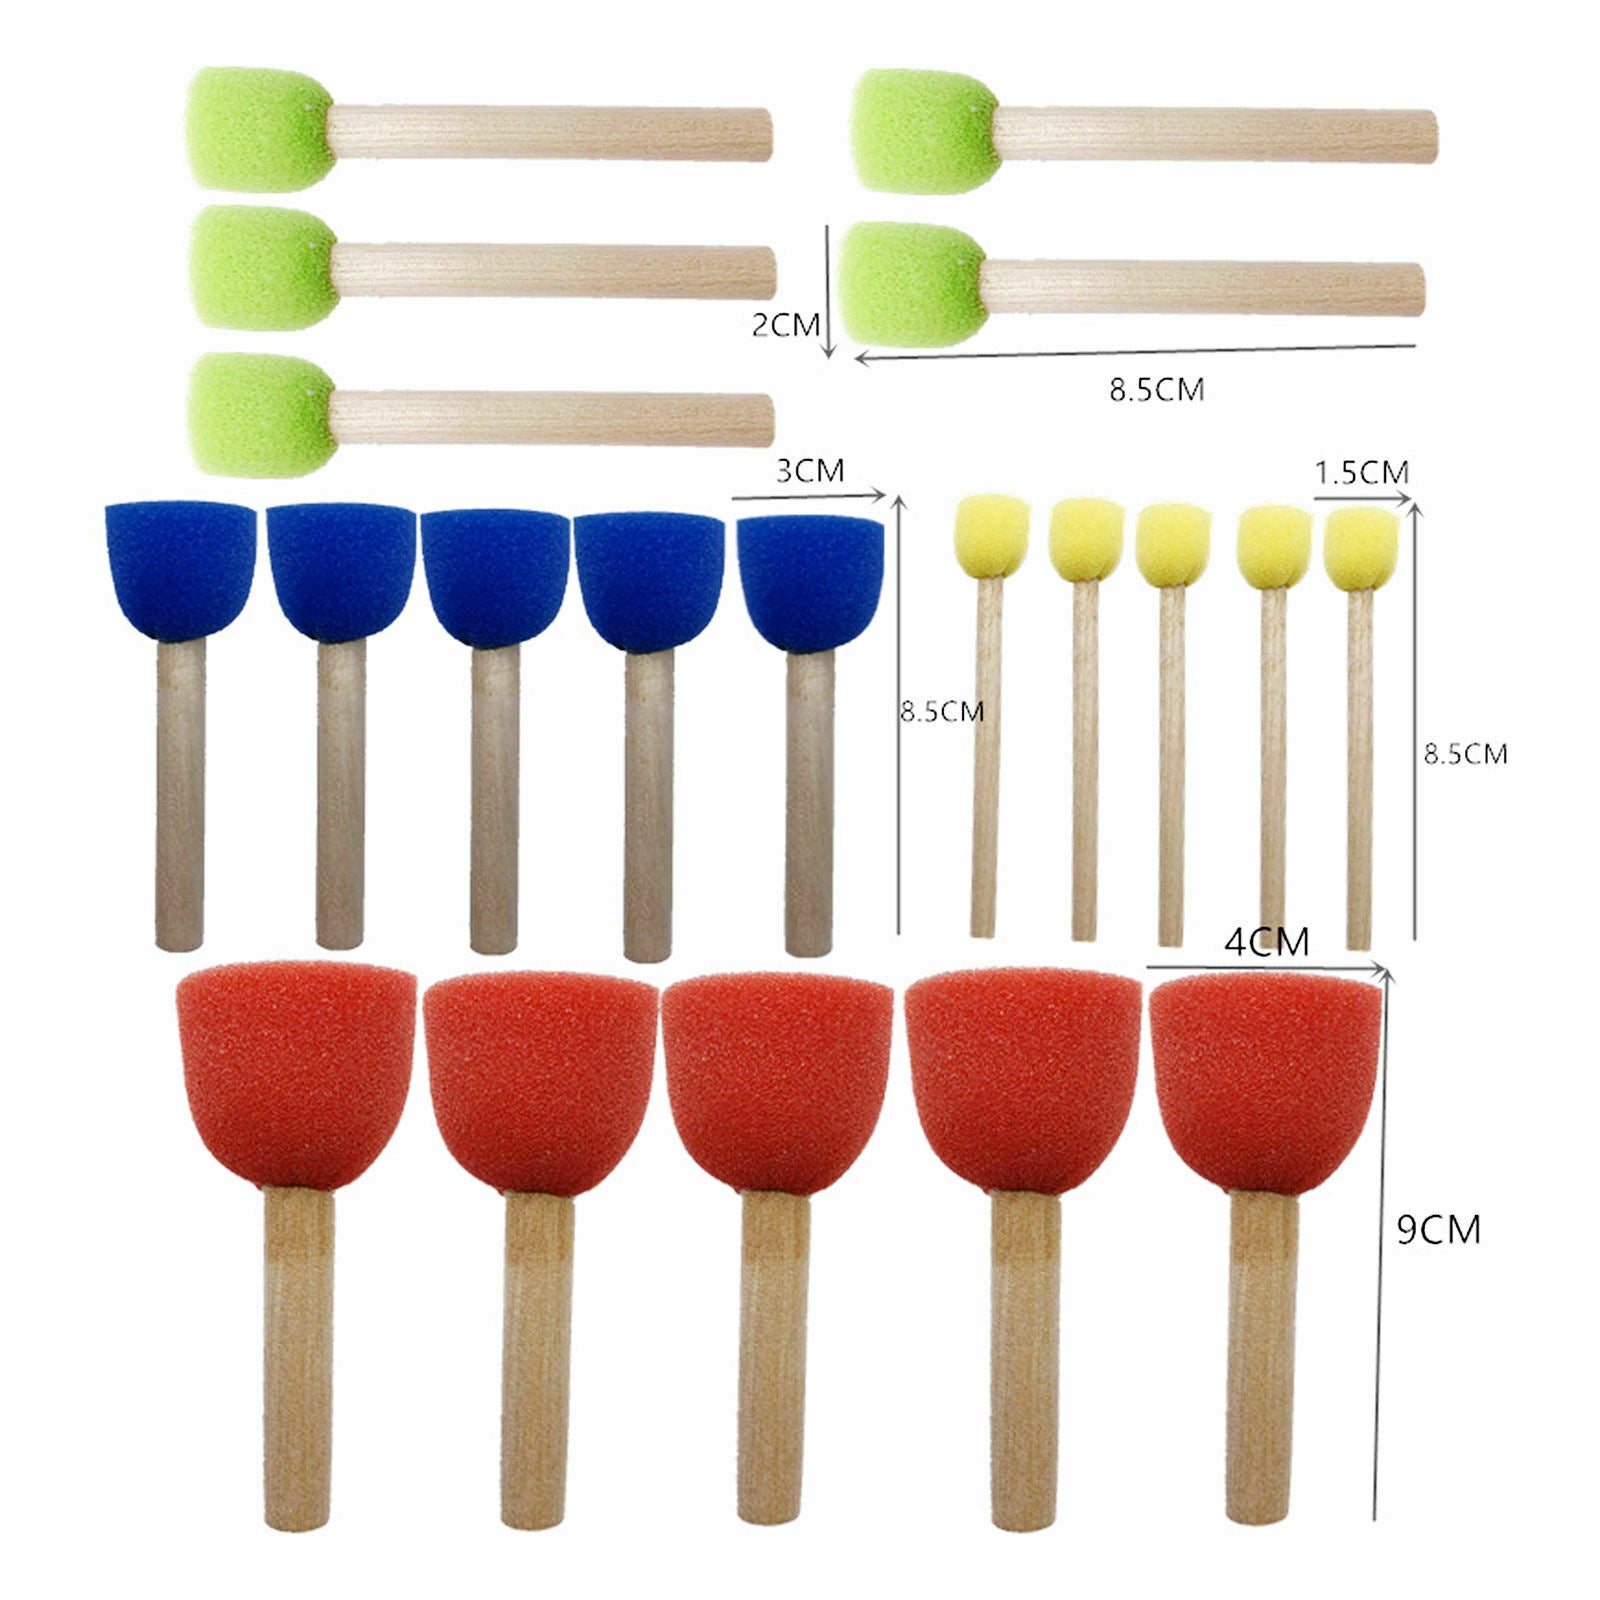 24 Pieces Round Sponges Brush Set Painting Stippler Assorted Size for Kids